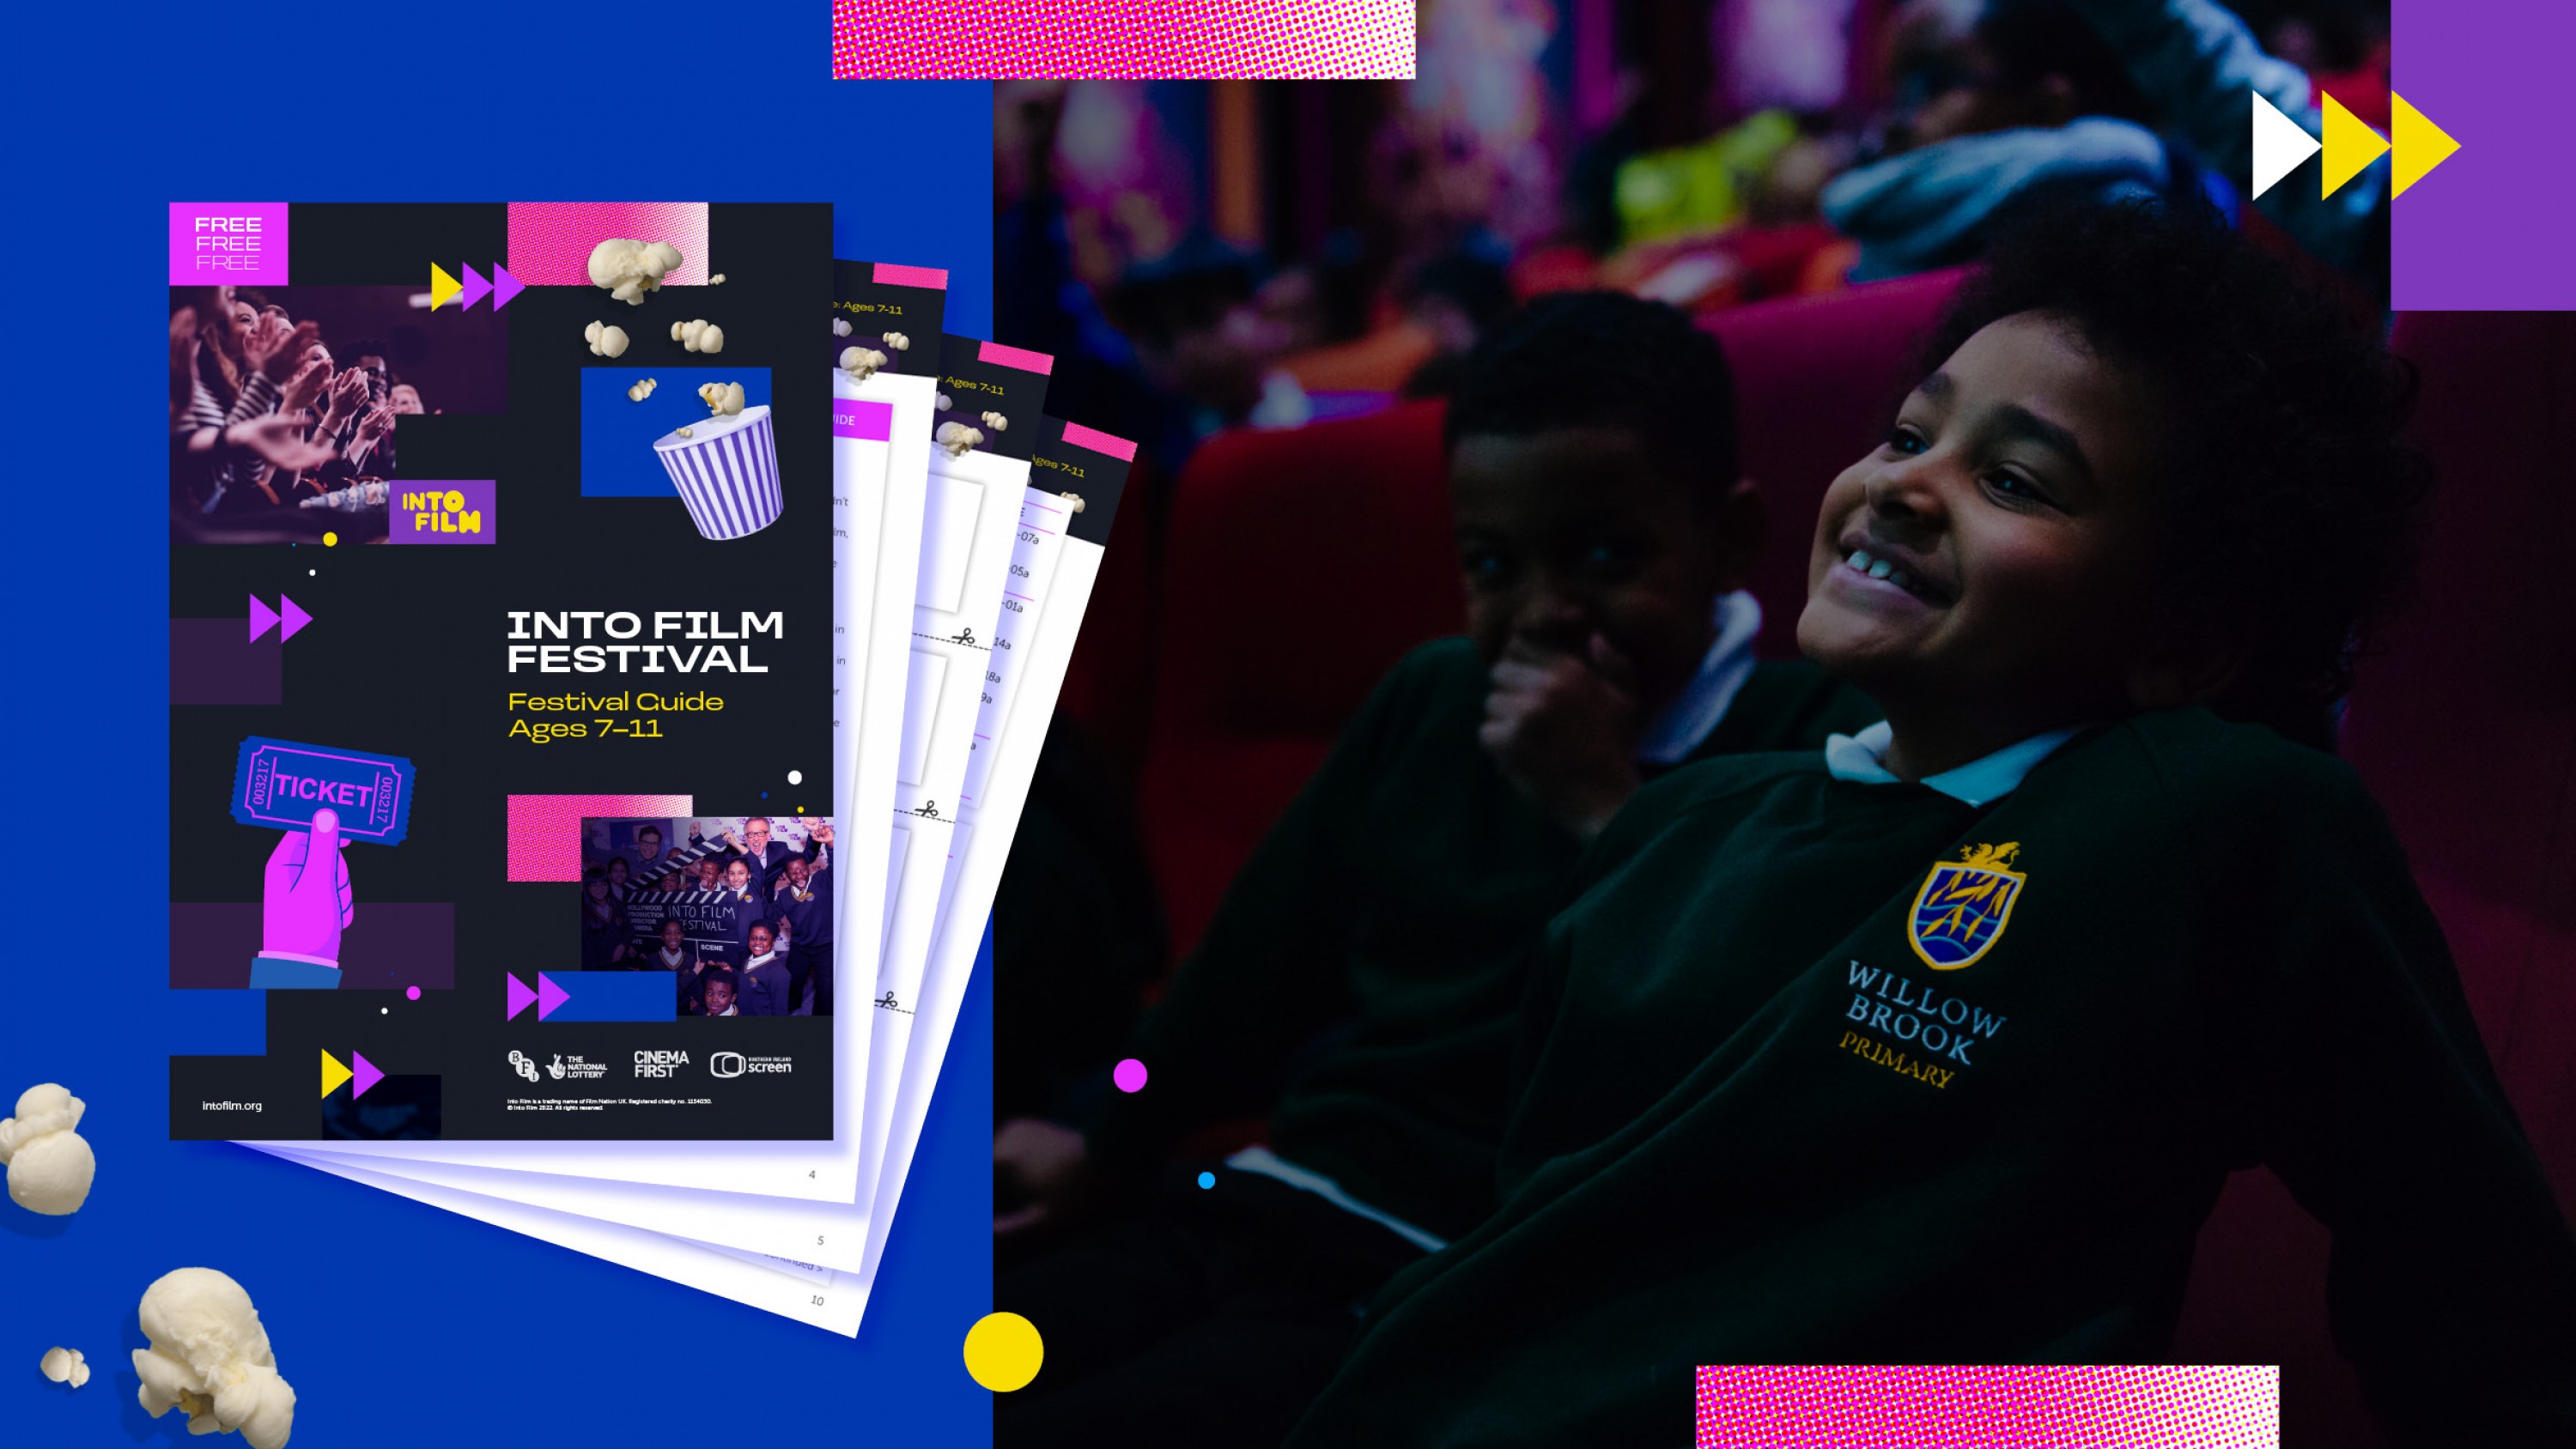 Guidance for attending the Into Film Festival with young people aged 7-11. 